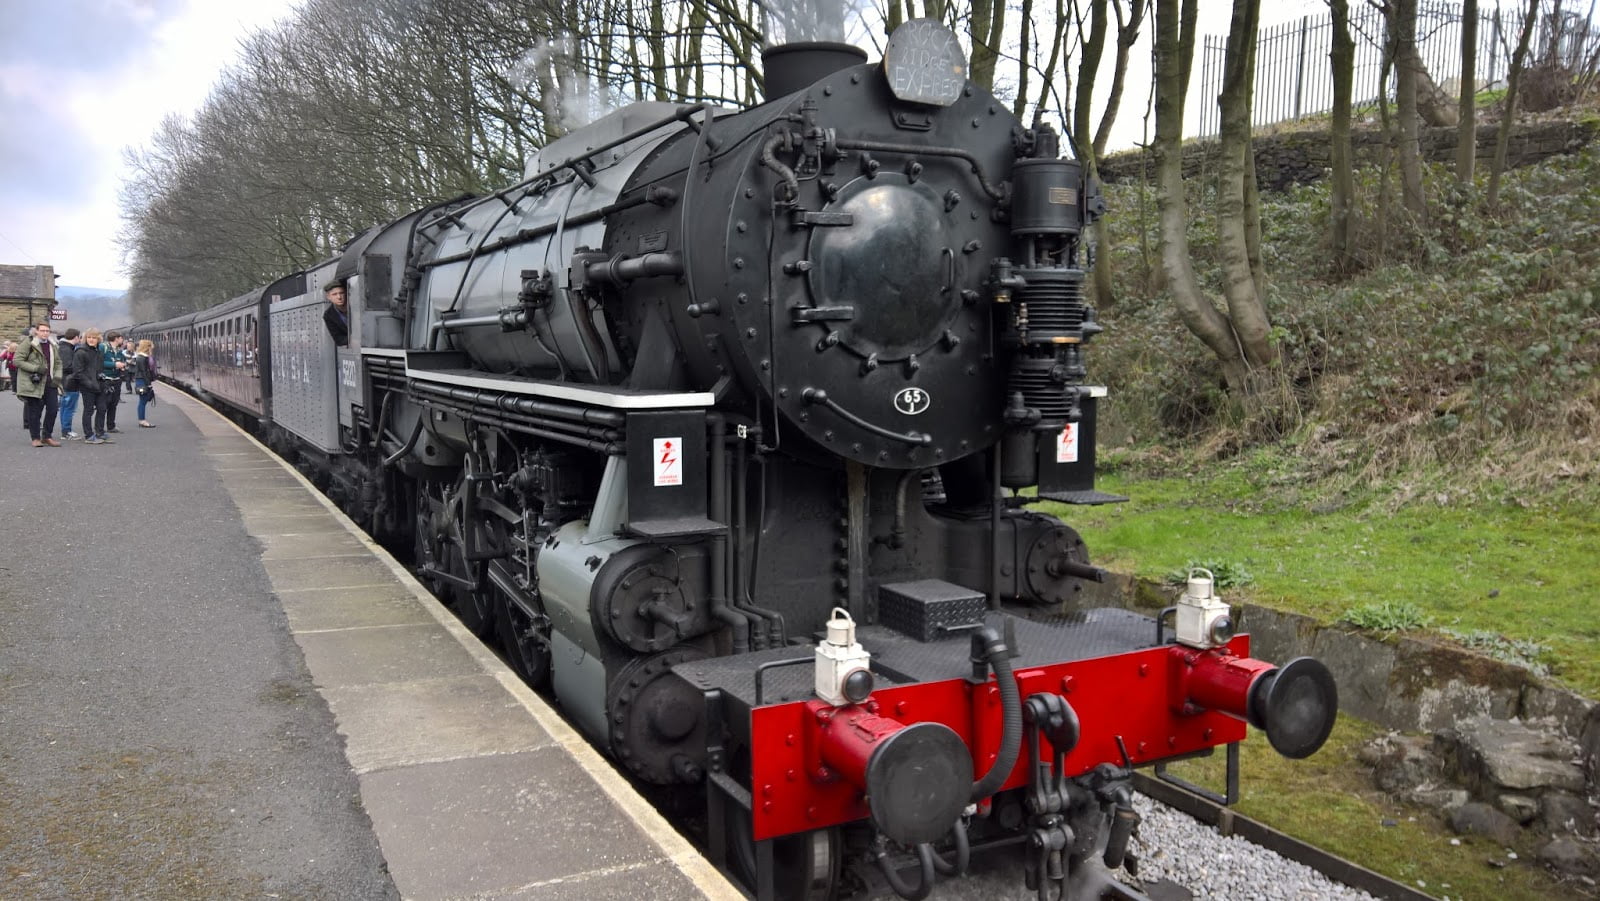 Big Jim at Ingrow West on the Keighley & Worth Valley Railway